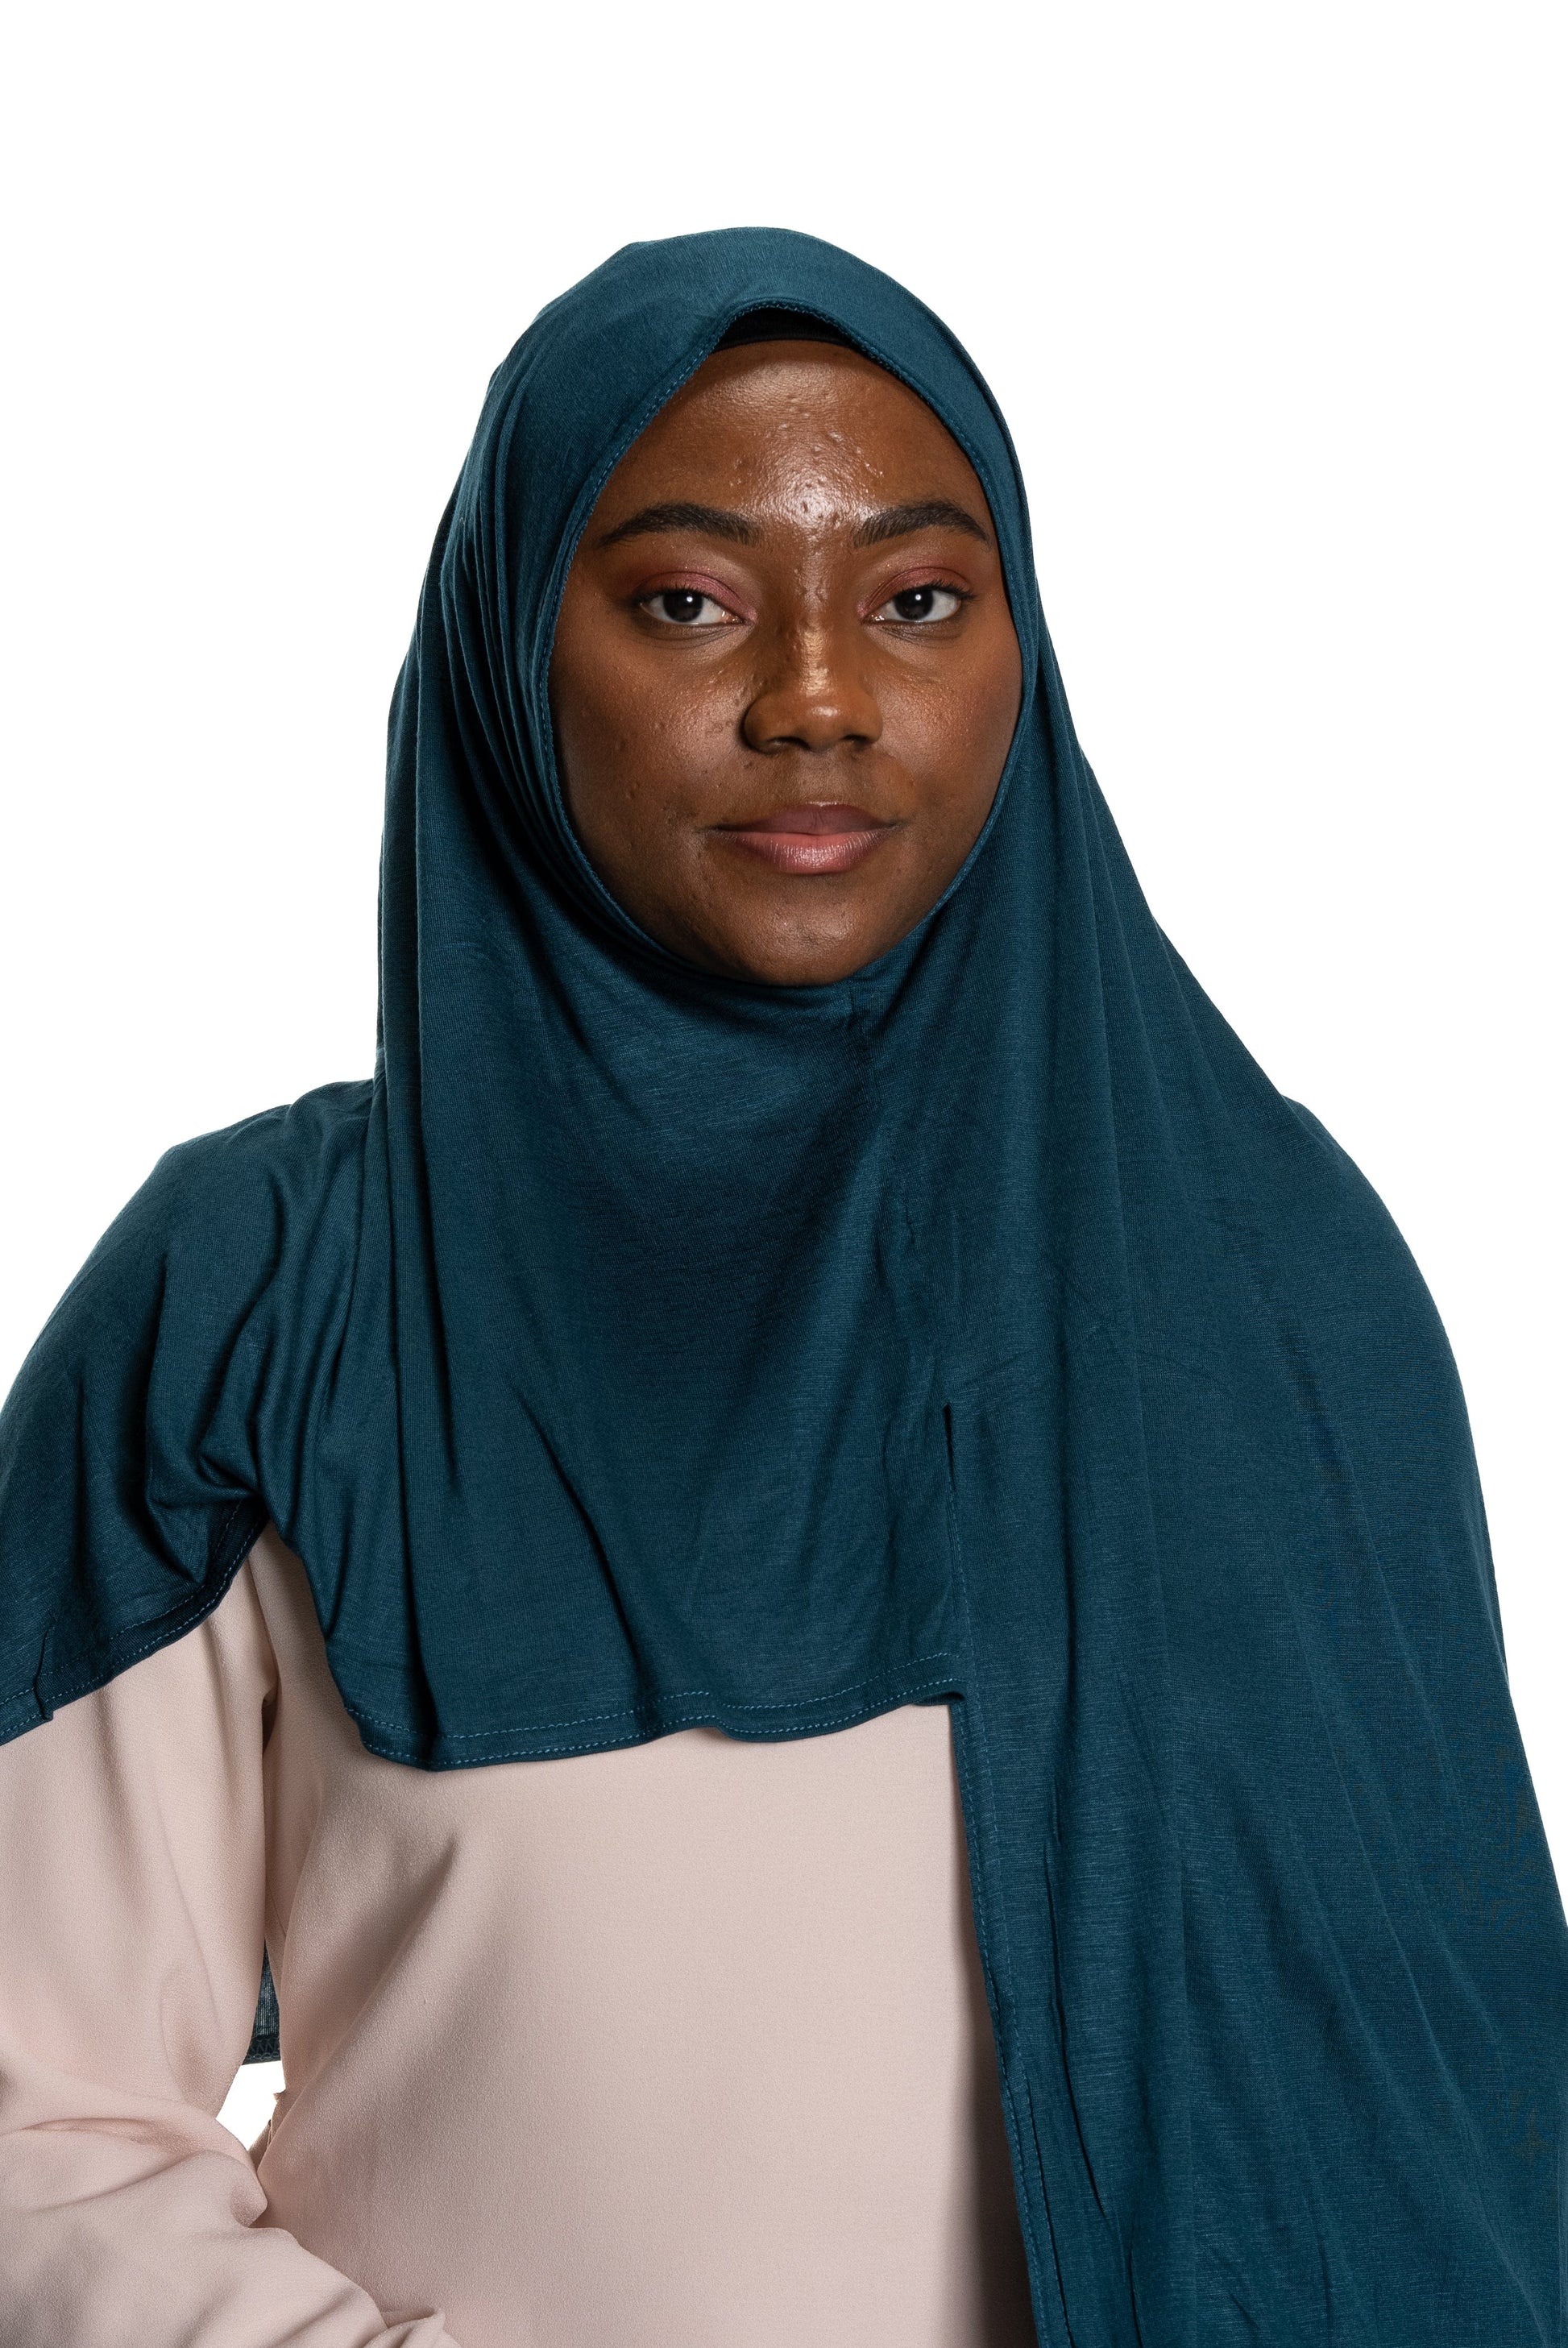 Jolie Nisa Hijab Premium Slip-on Jersey Instant Head Scarf Wrap for Effortless and Stylish Hijab Wear Premium Slip-on instant Jersey Head Scarf Wrap for Effortless and Stylish Hijab Wear!